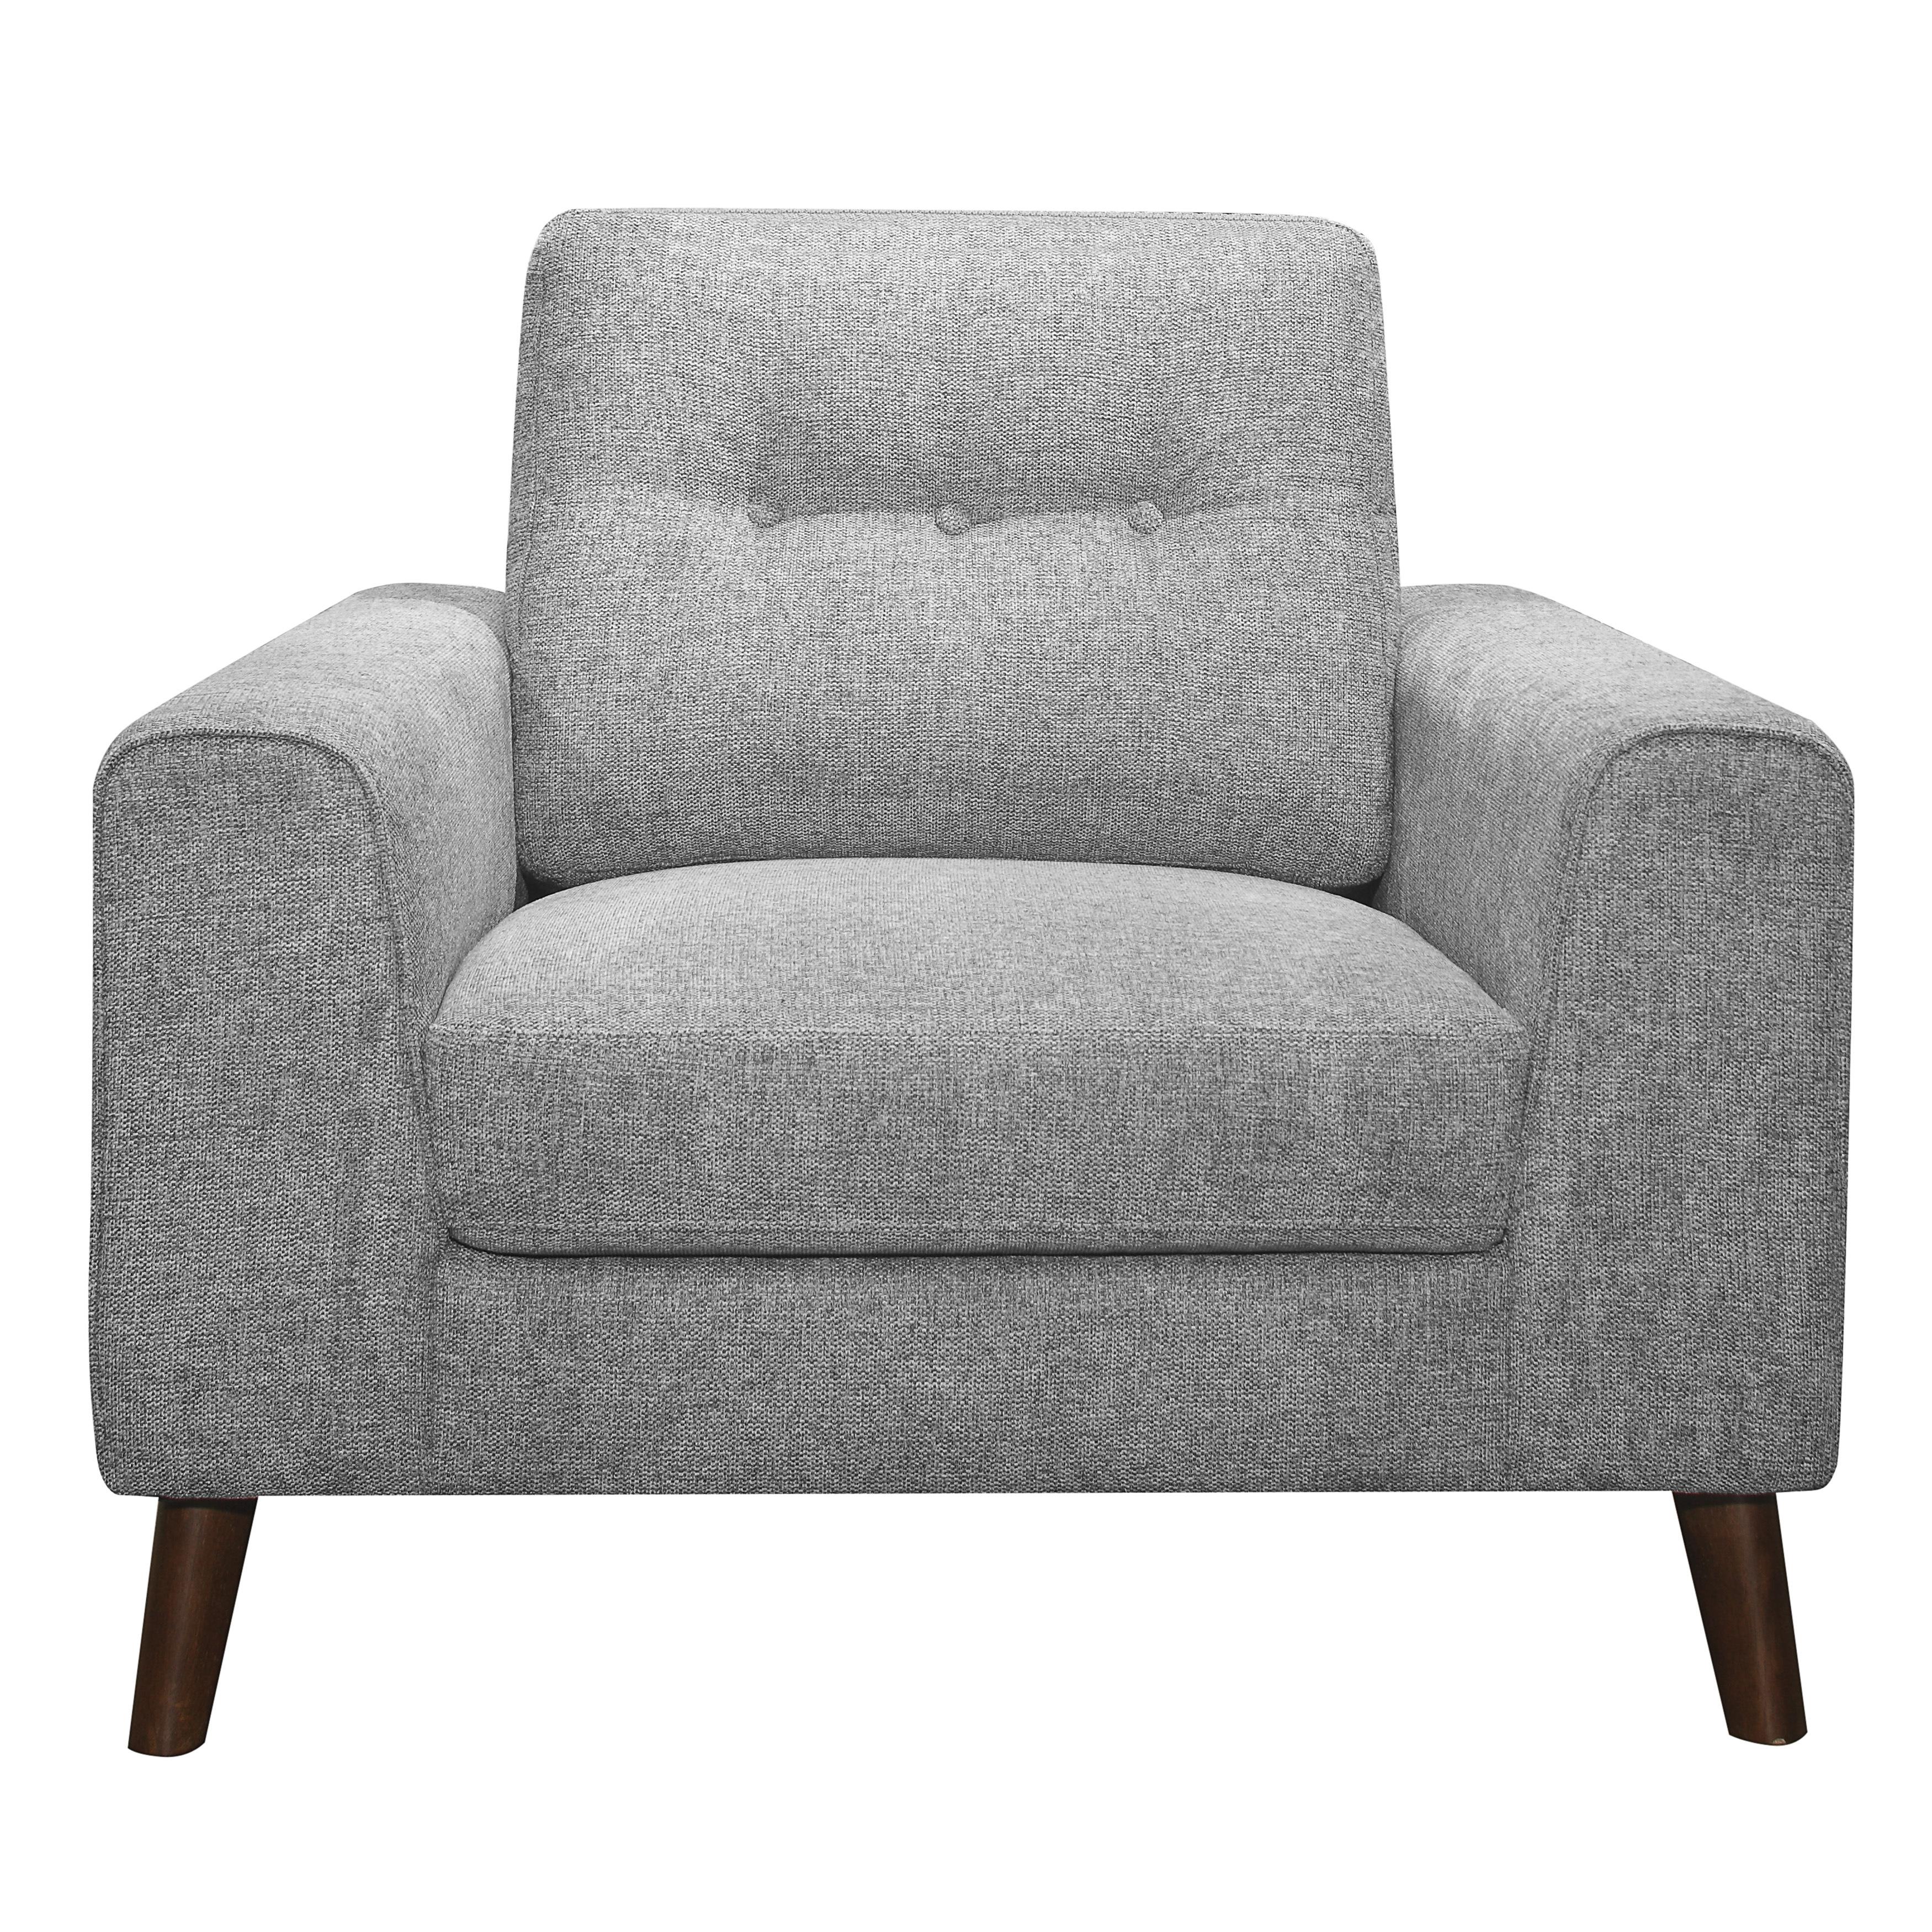 Contemporary Arm Chair 9300GY-1 Alexia 9300GY-1 in Gray 